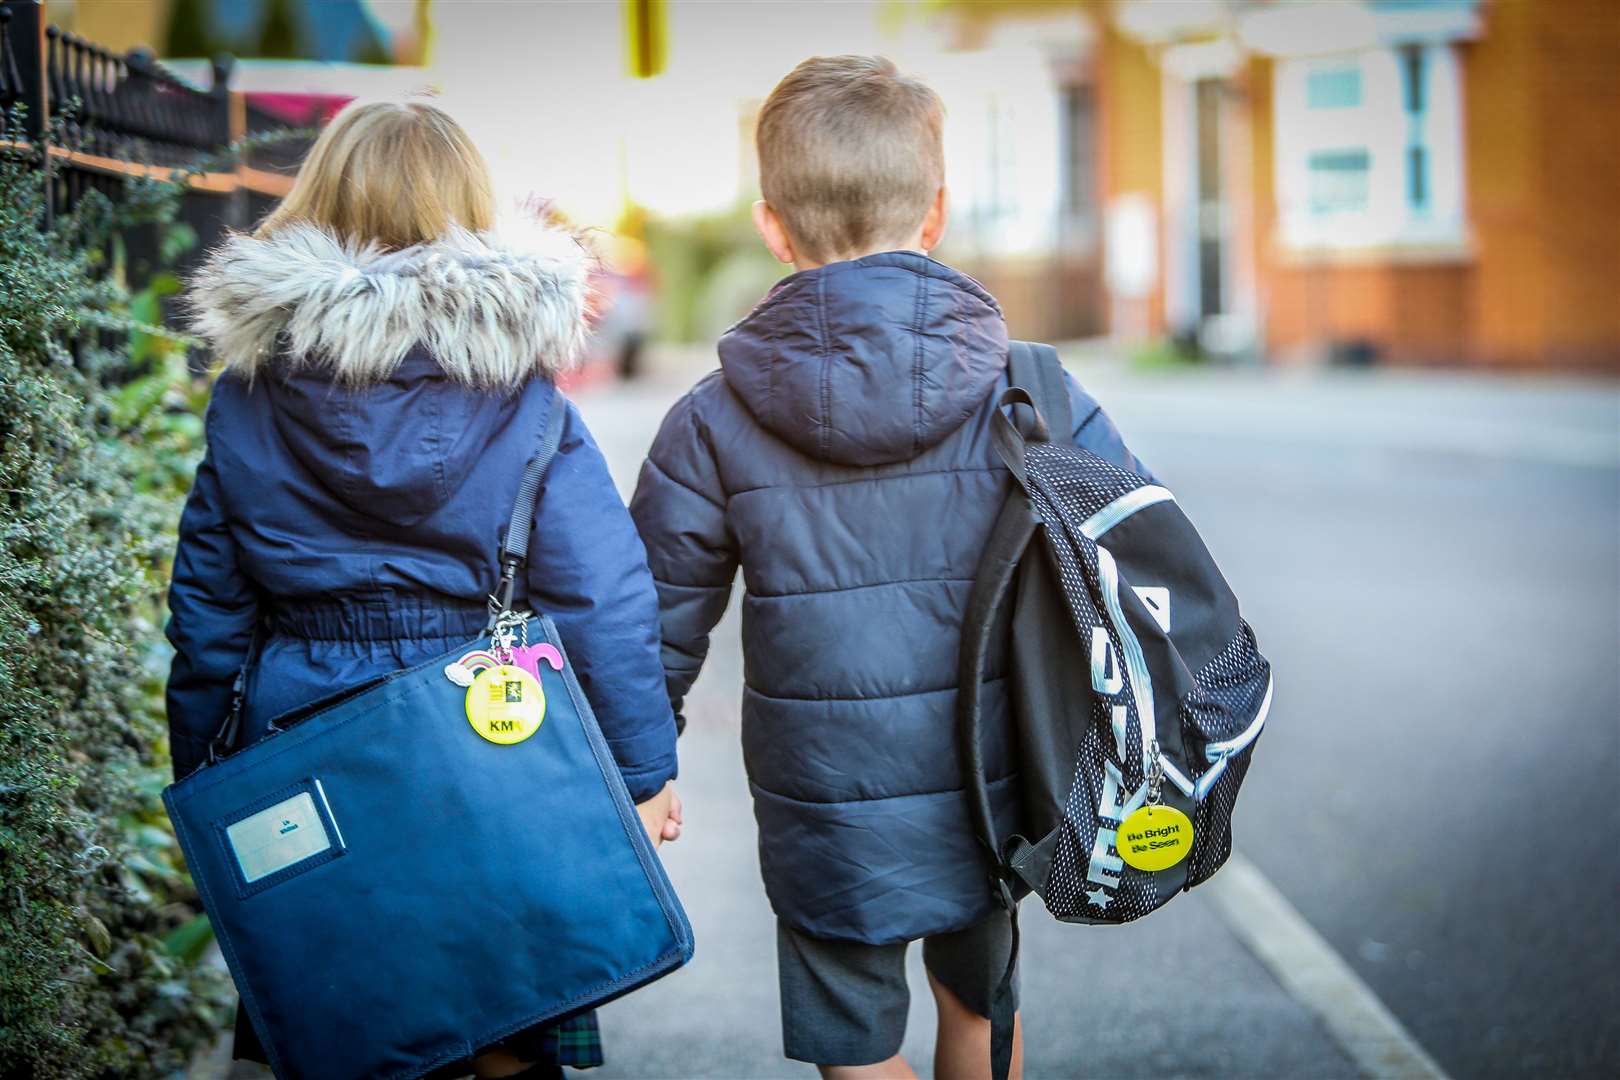 If children wear dark coats and clothing to school parents need to help ensure they can be seen by car headlights